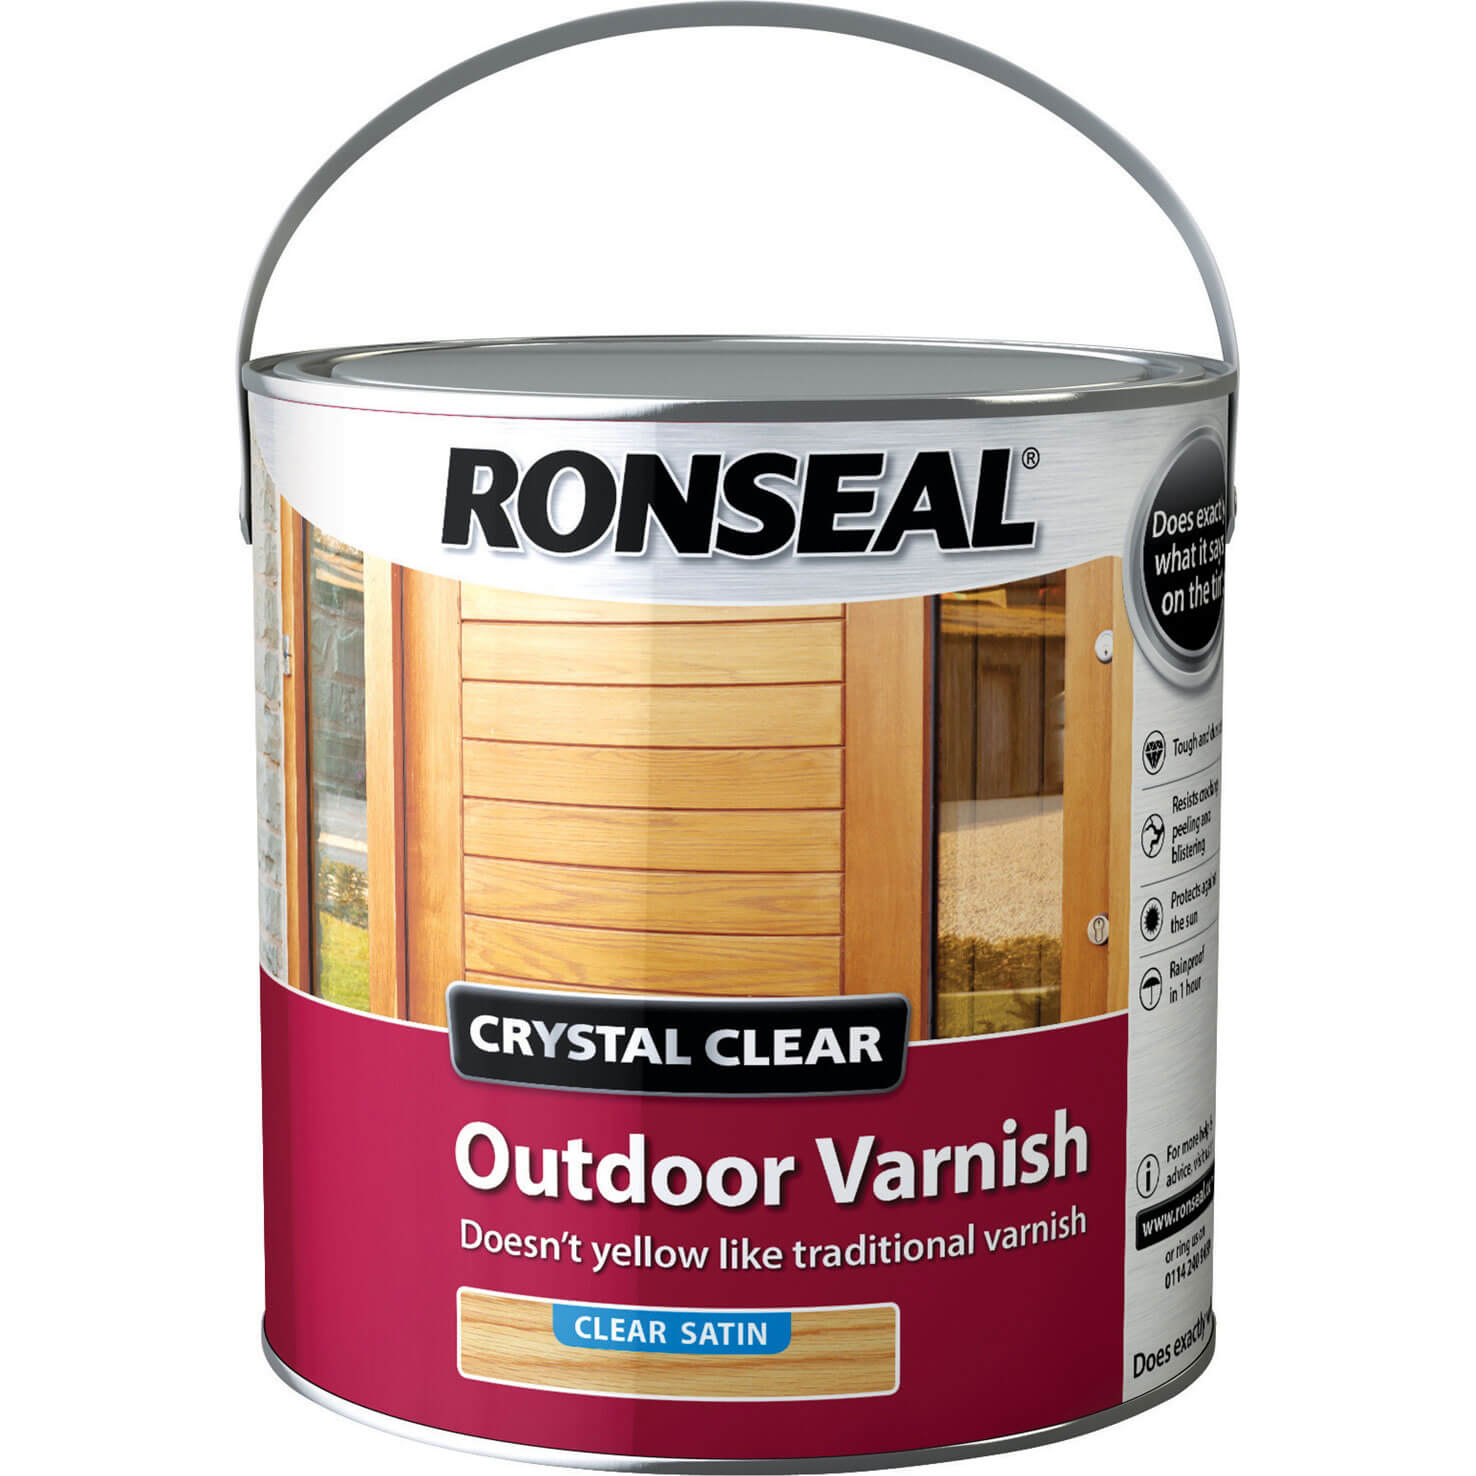 Image of Ronseal Crystal Clear Outdoor Varnish Satin 2.5l